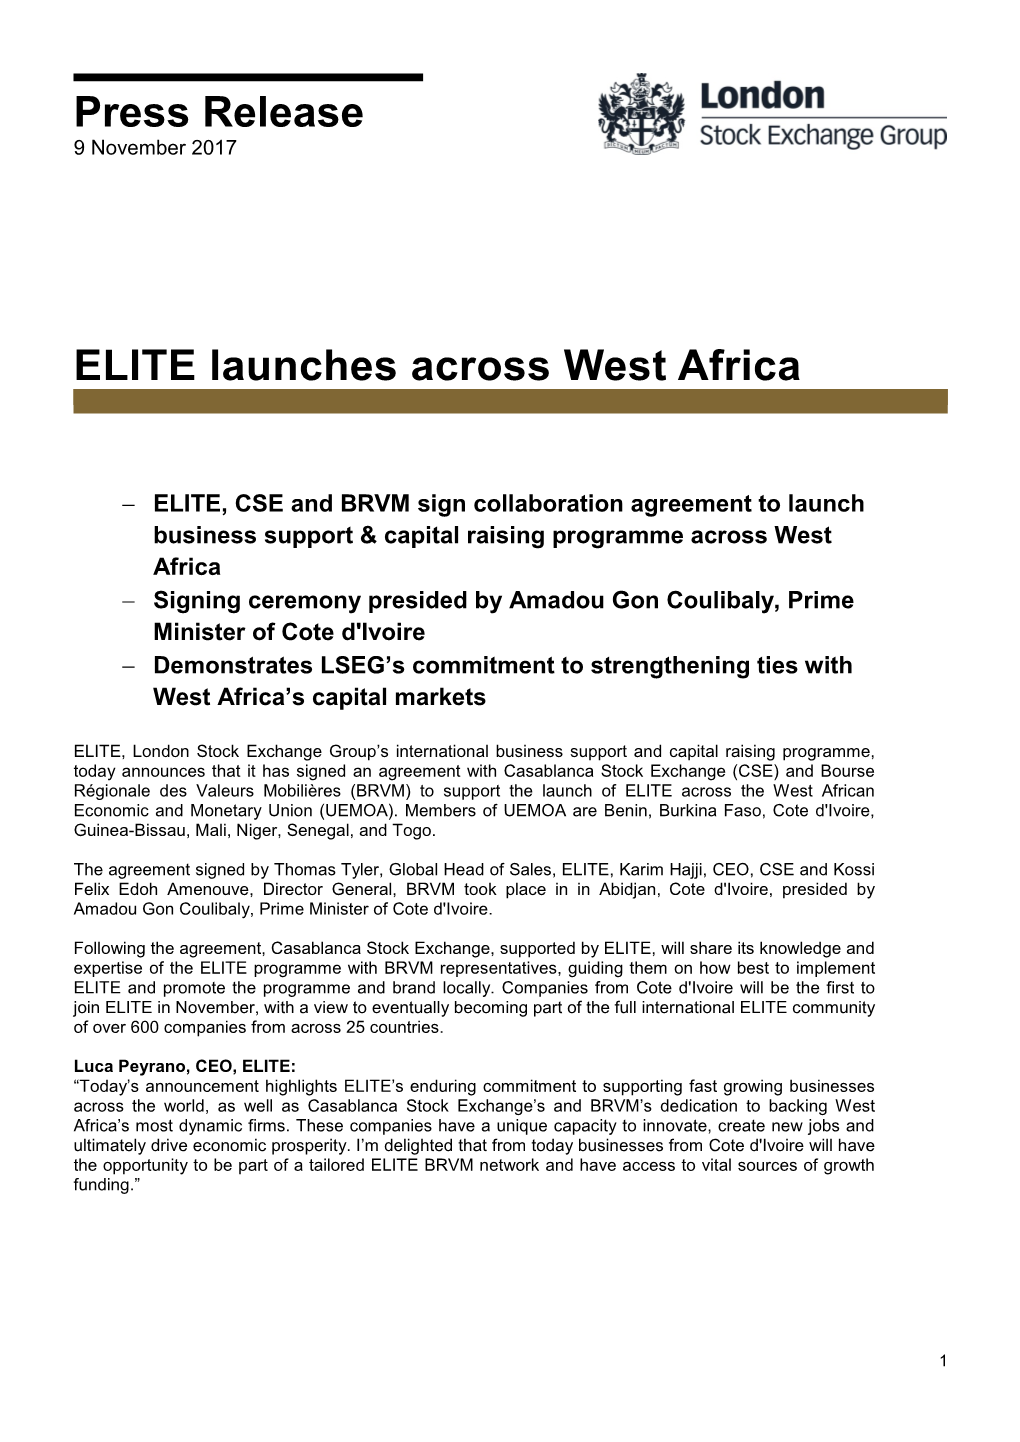 ELITE Launches Across West Africa